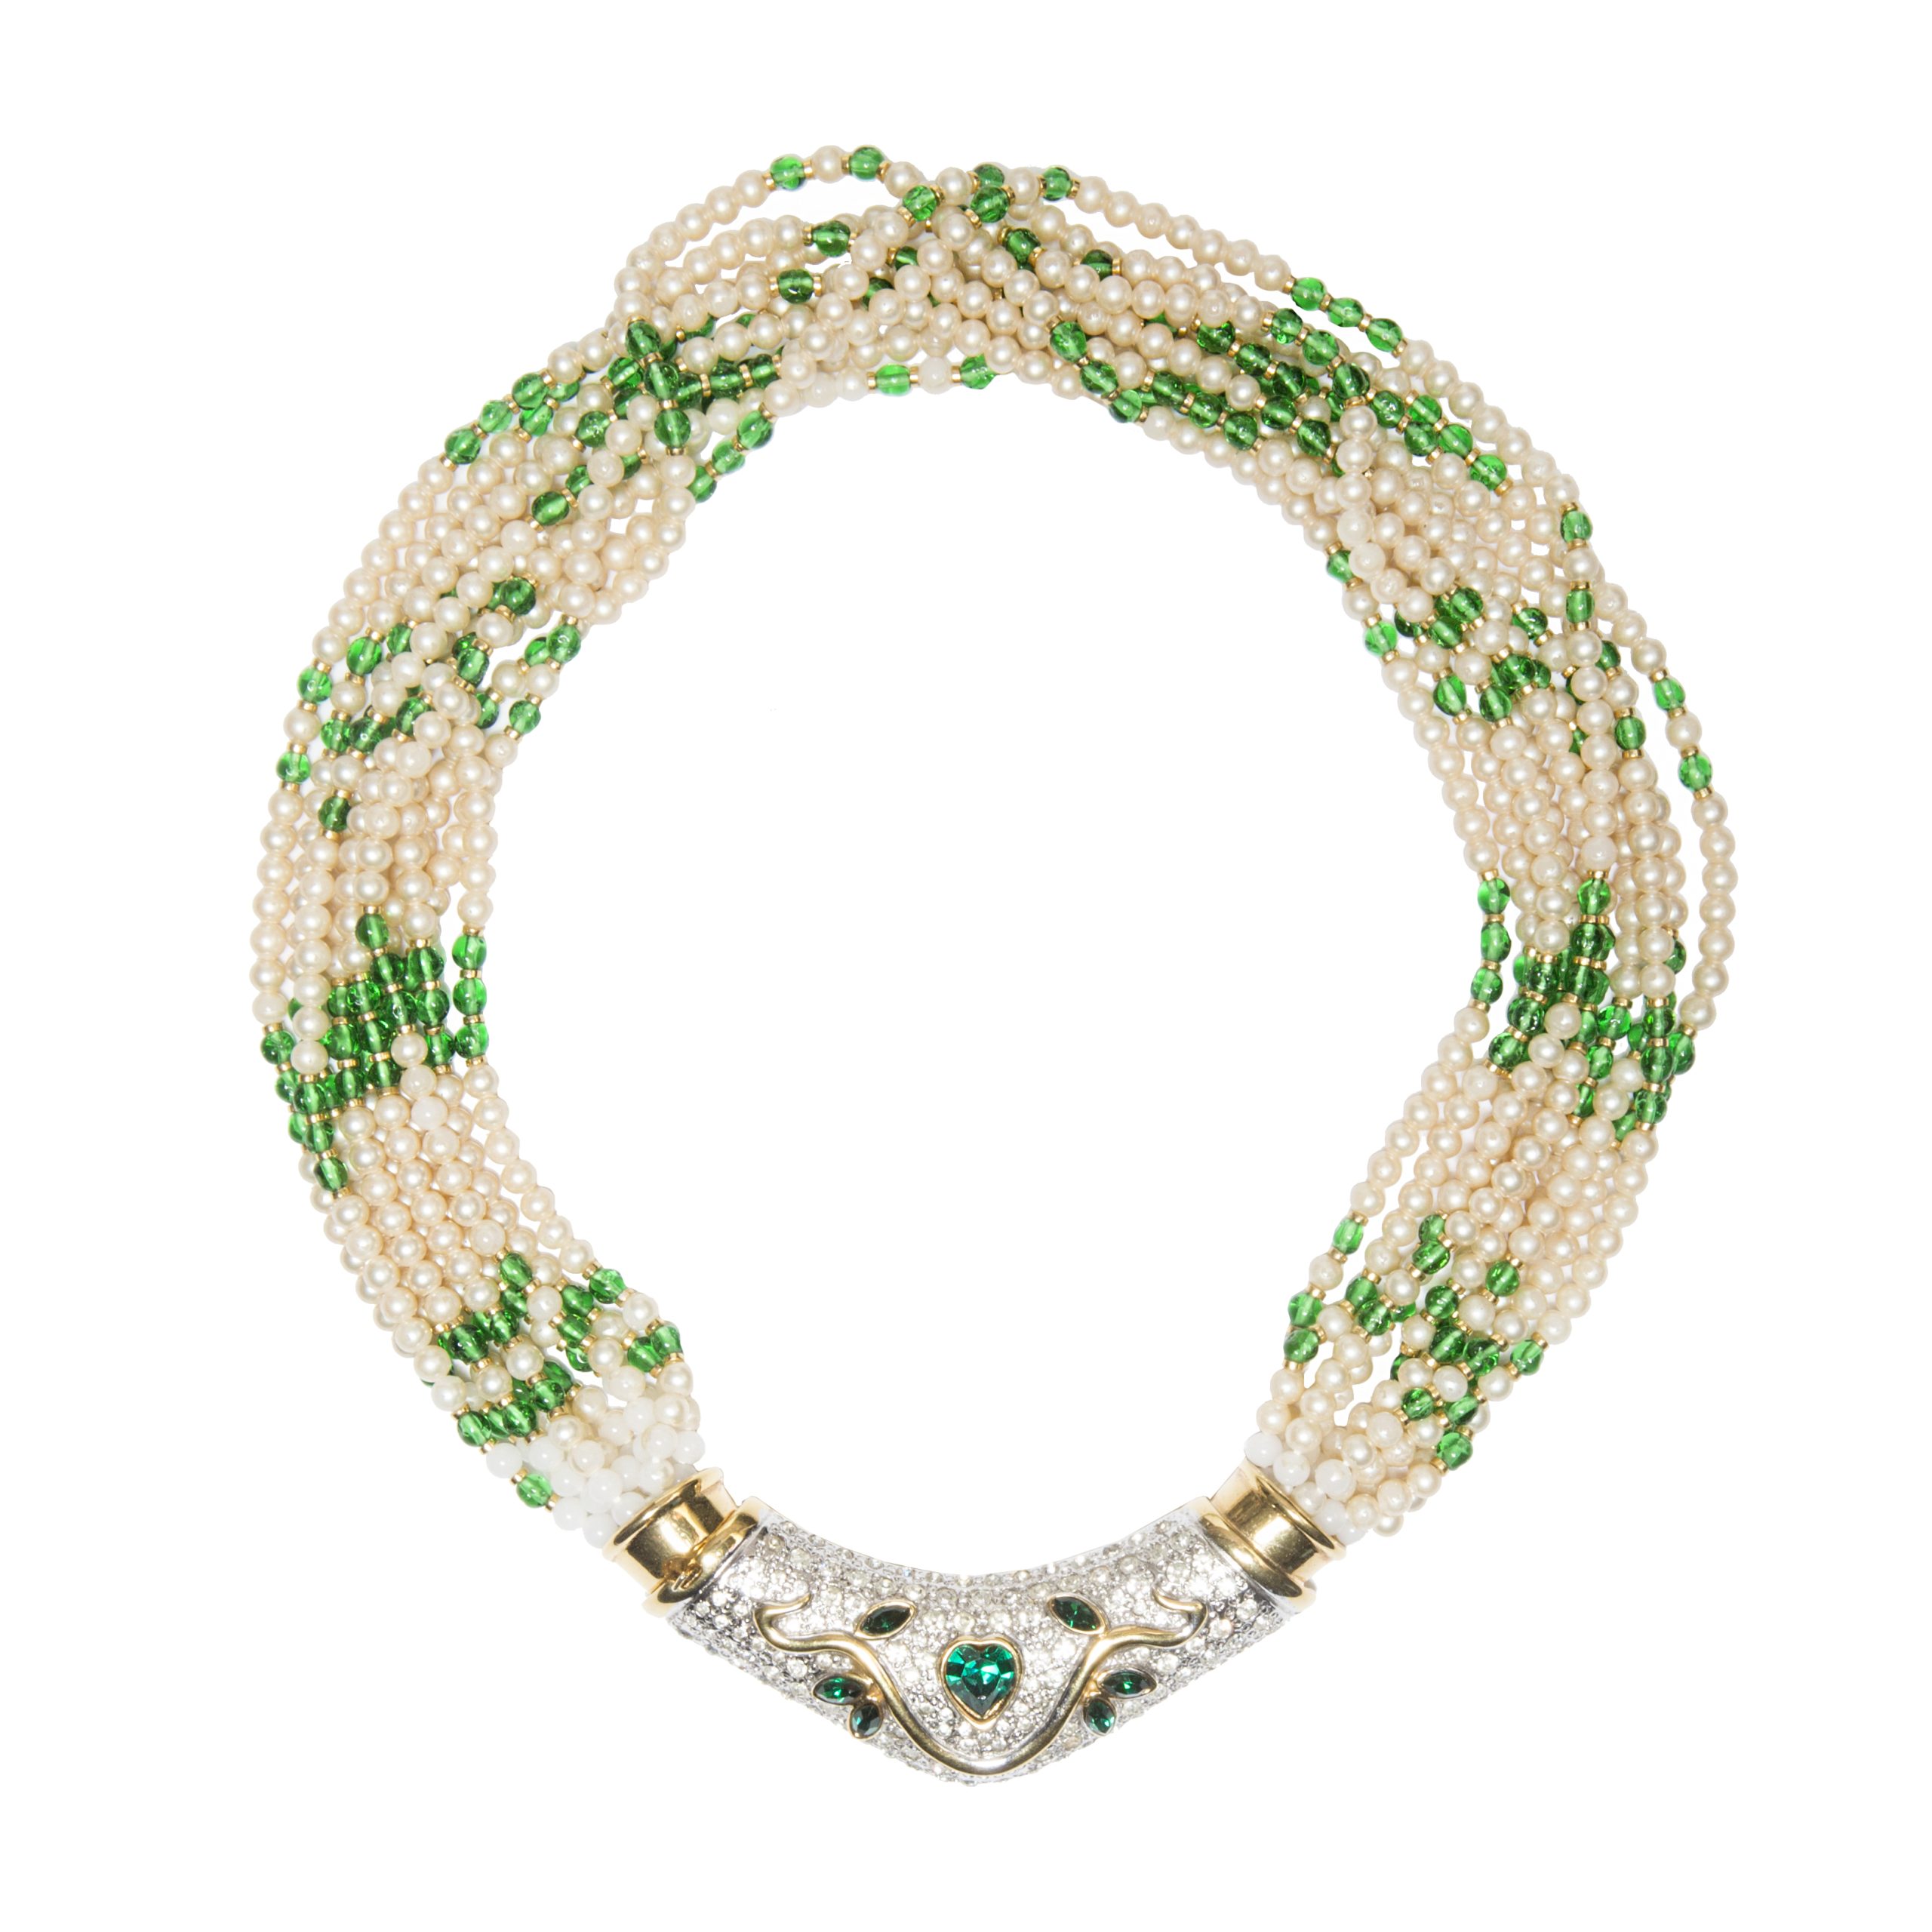 Vintage pearl green necklace with rhinestones